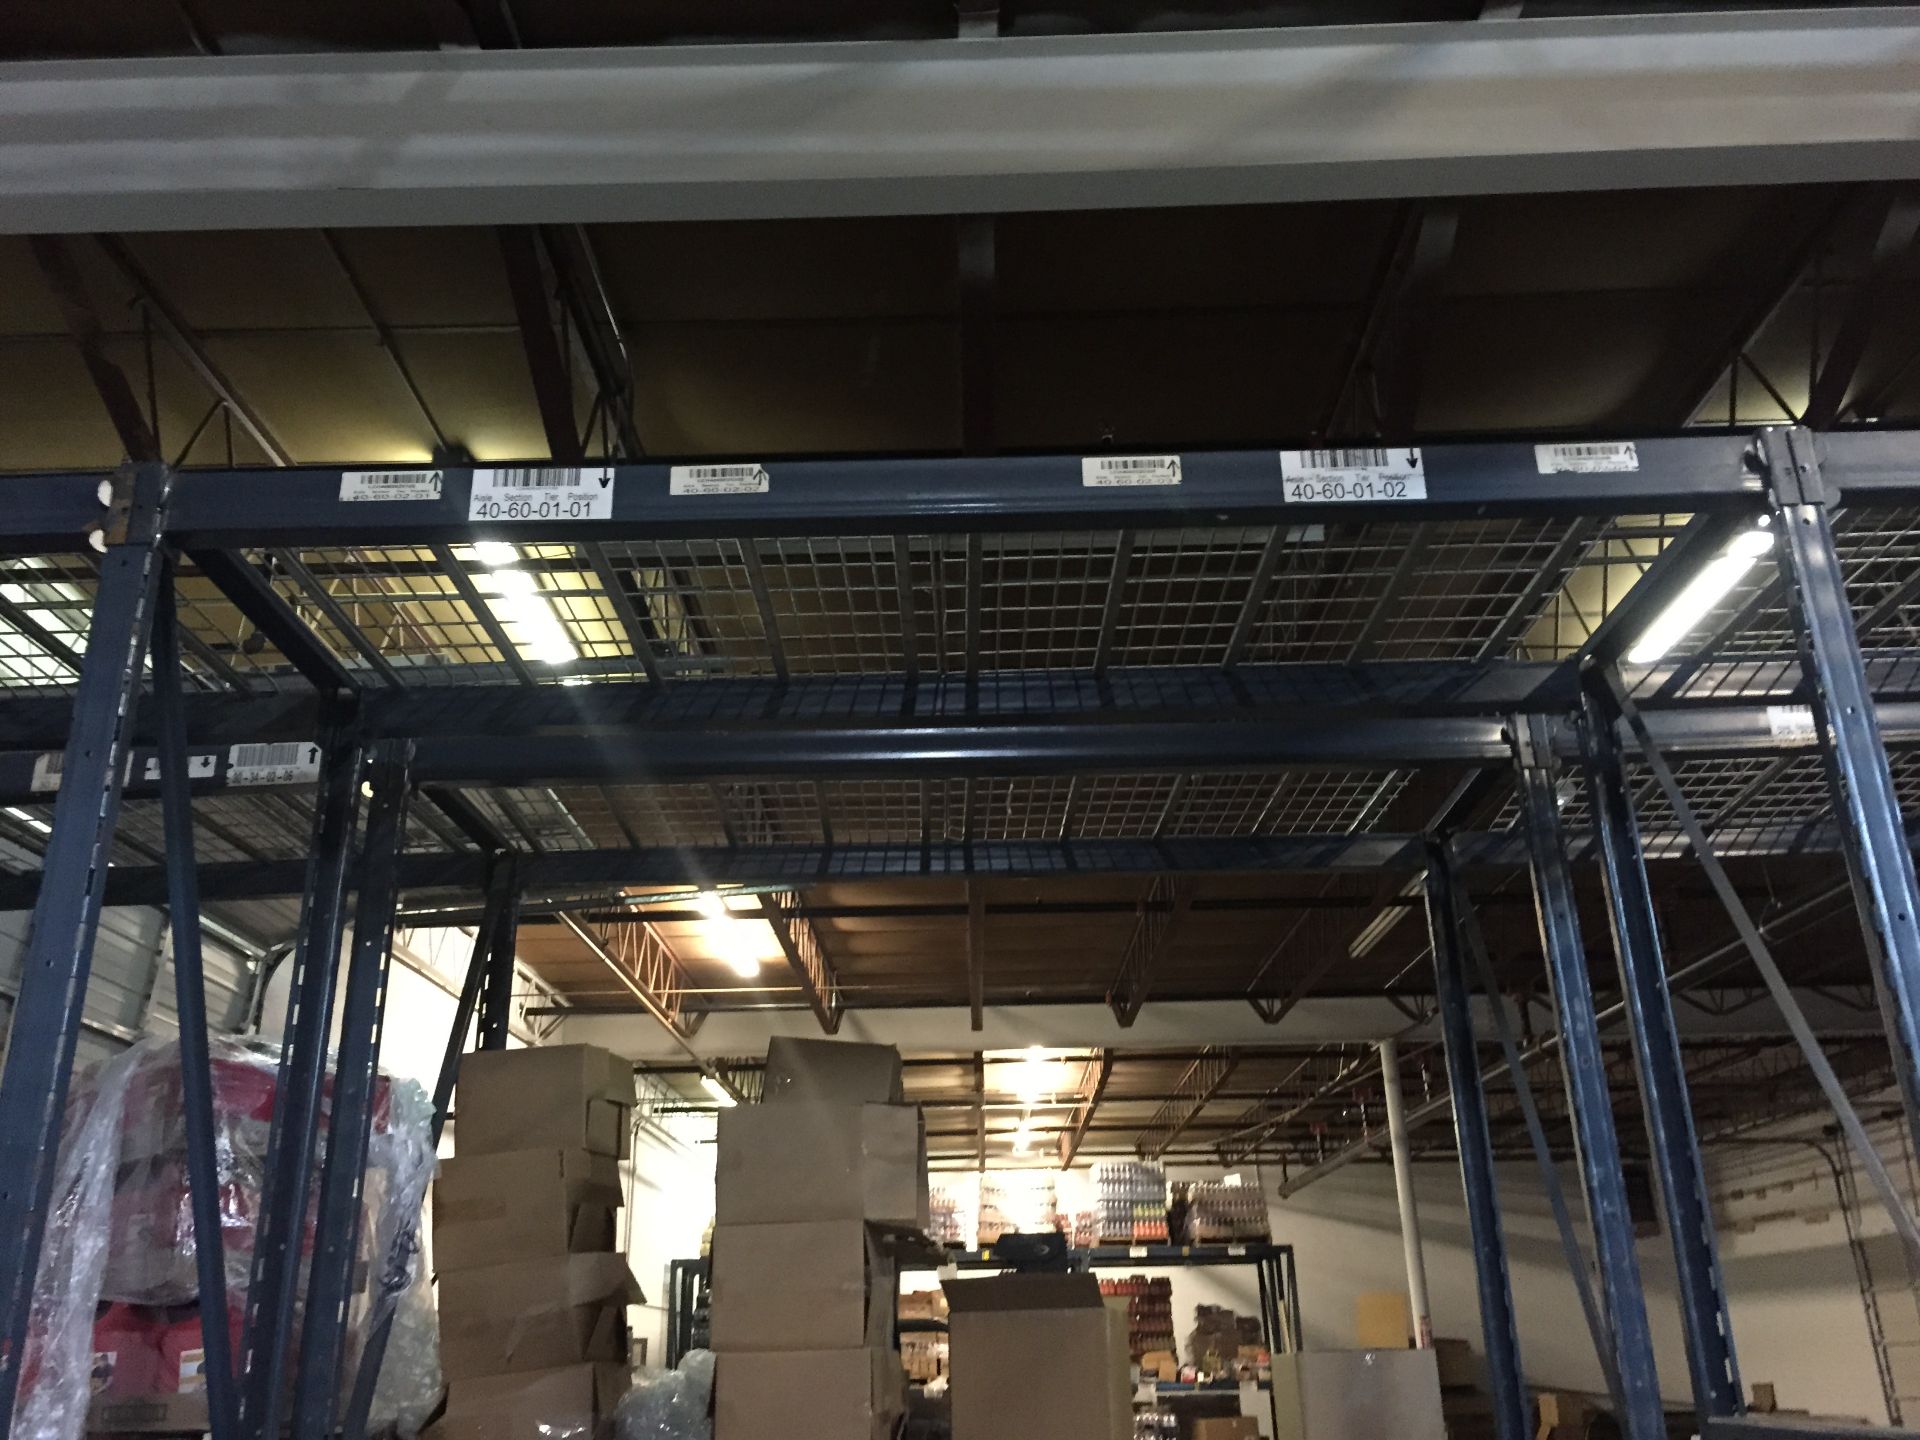 96"H X 36"D X 96"L STOCK ROOM SHELVING, TOTAL 14 SECTIONS WITH 2 BEAM LEVELS EACH,  INCLUDES - Image 6 of 6